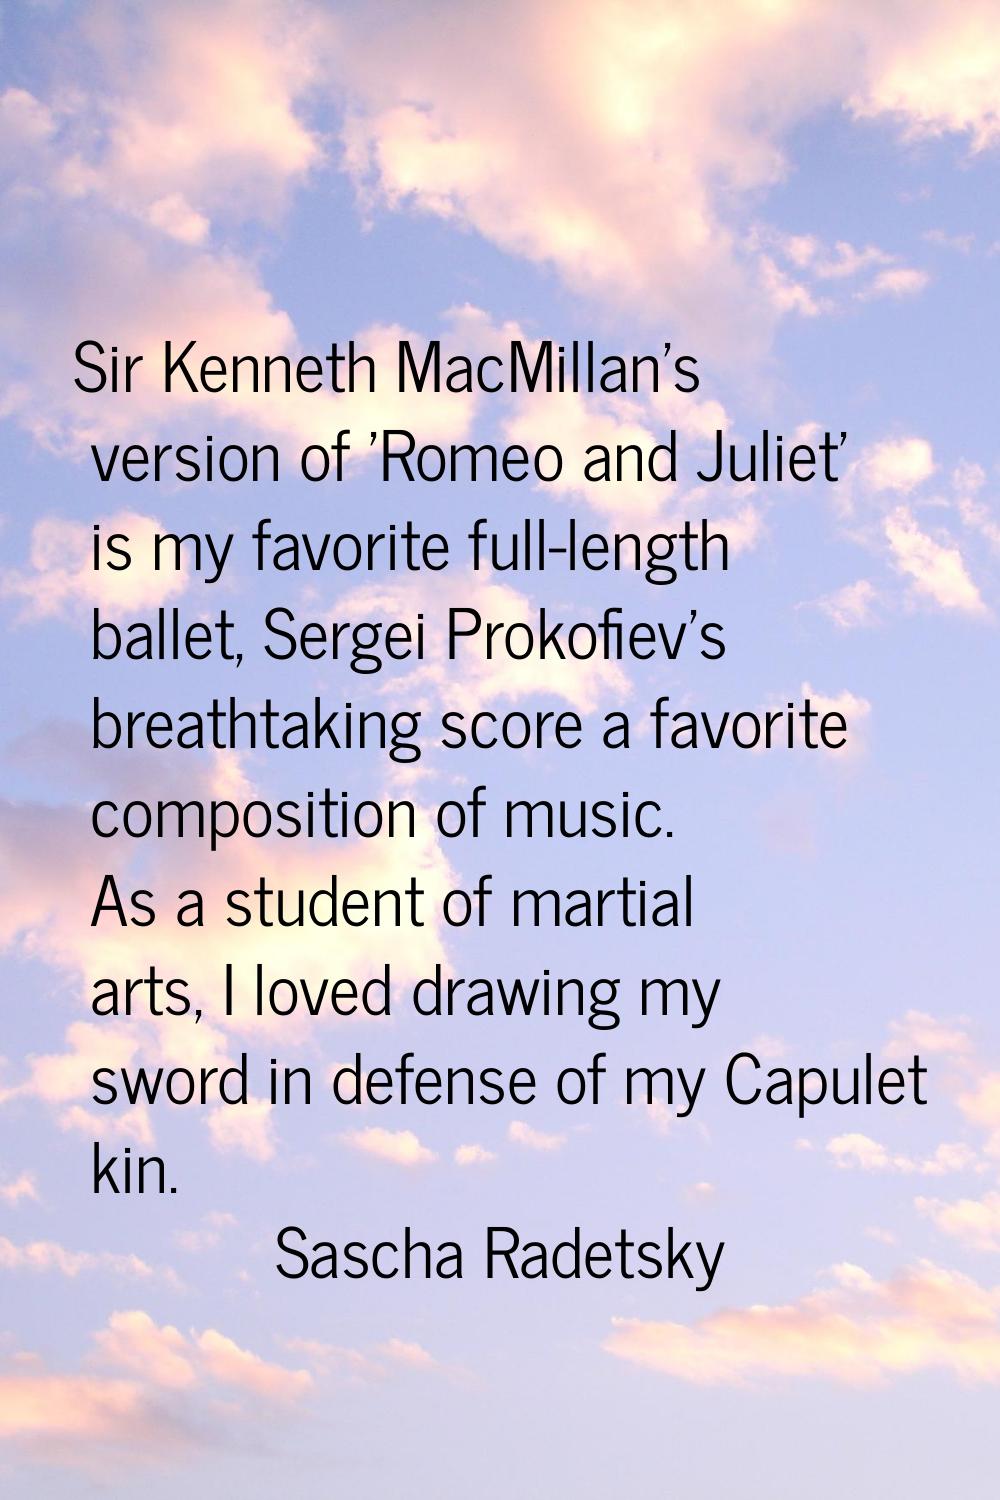 Sir Kenneth MacMillan's version of 'Romeo and Juliet' is my favorite full-length ballet, Sergei Pro